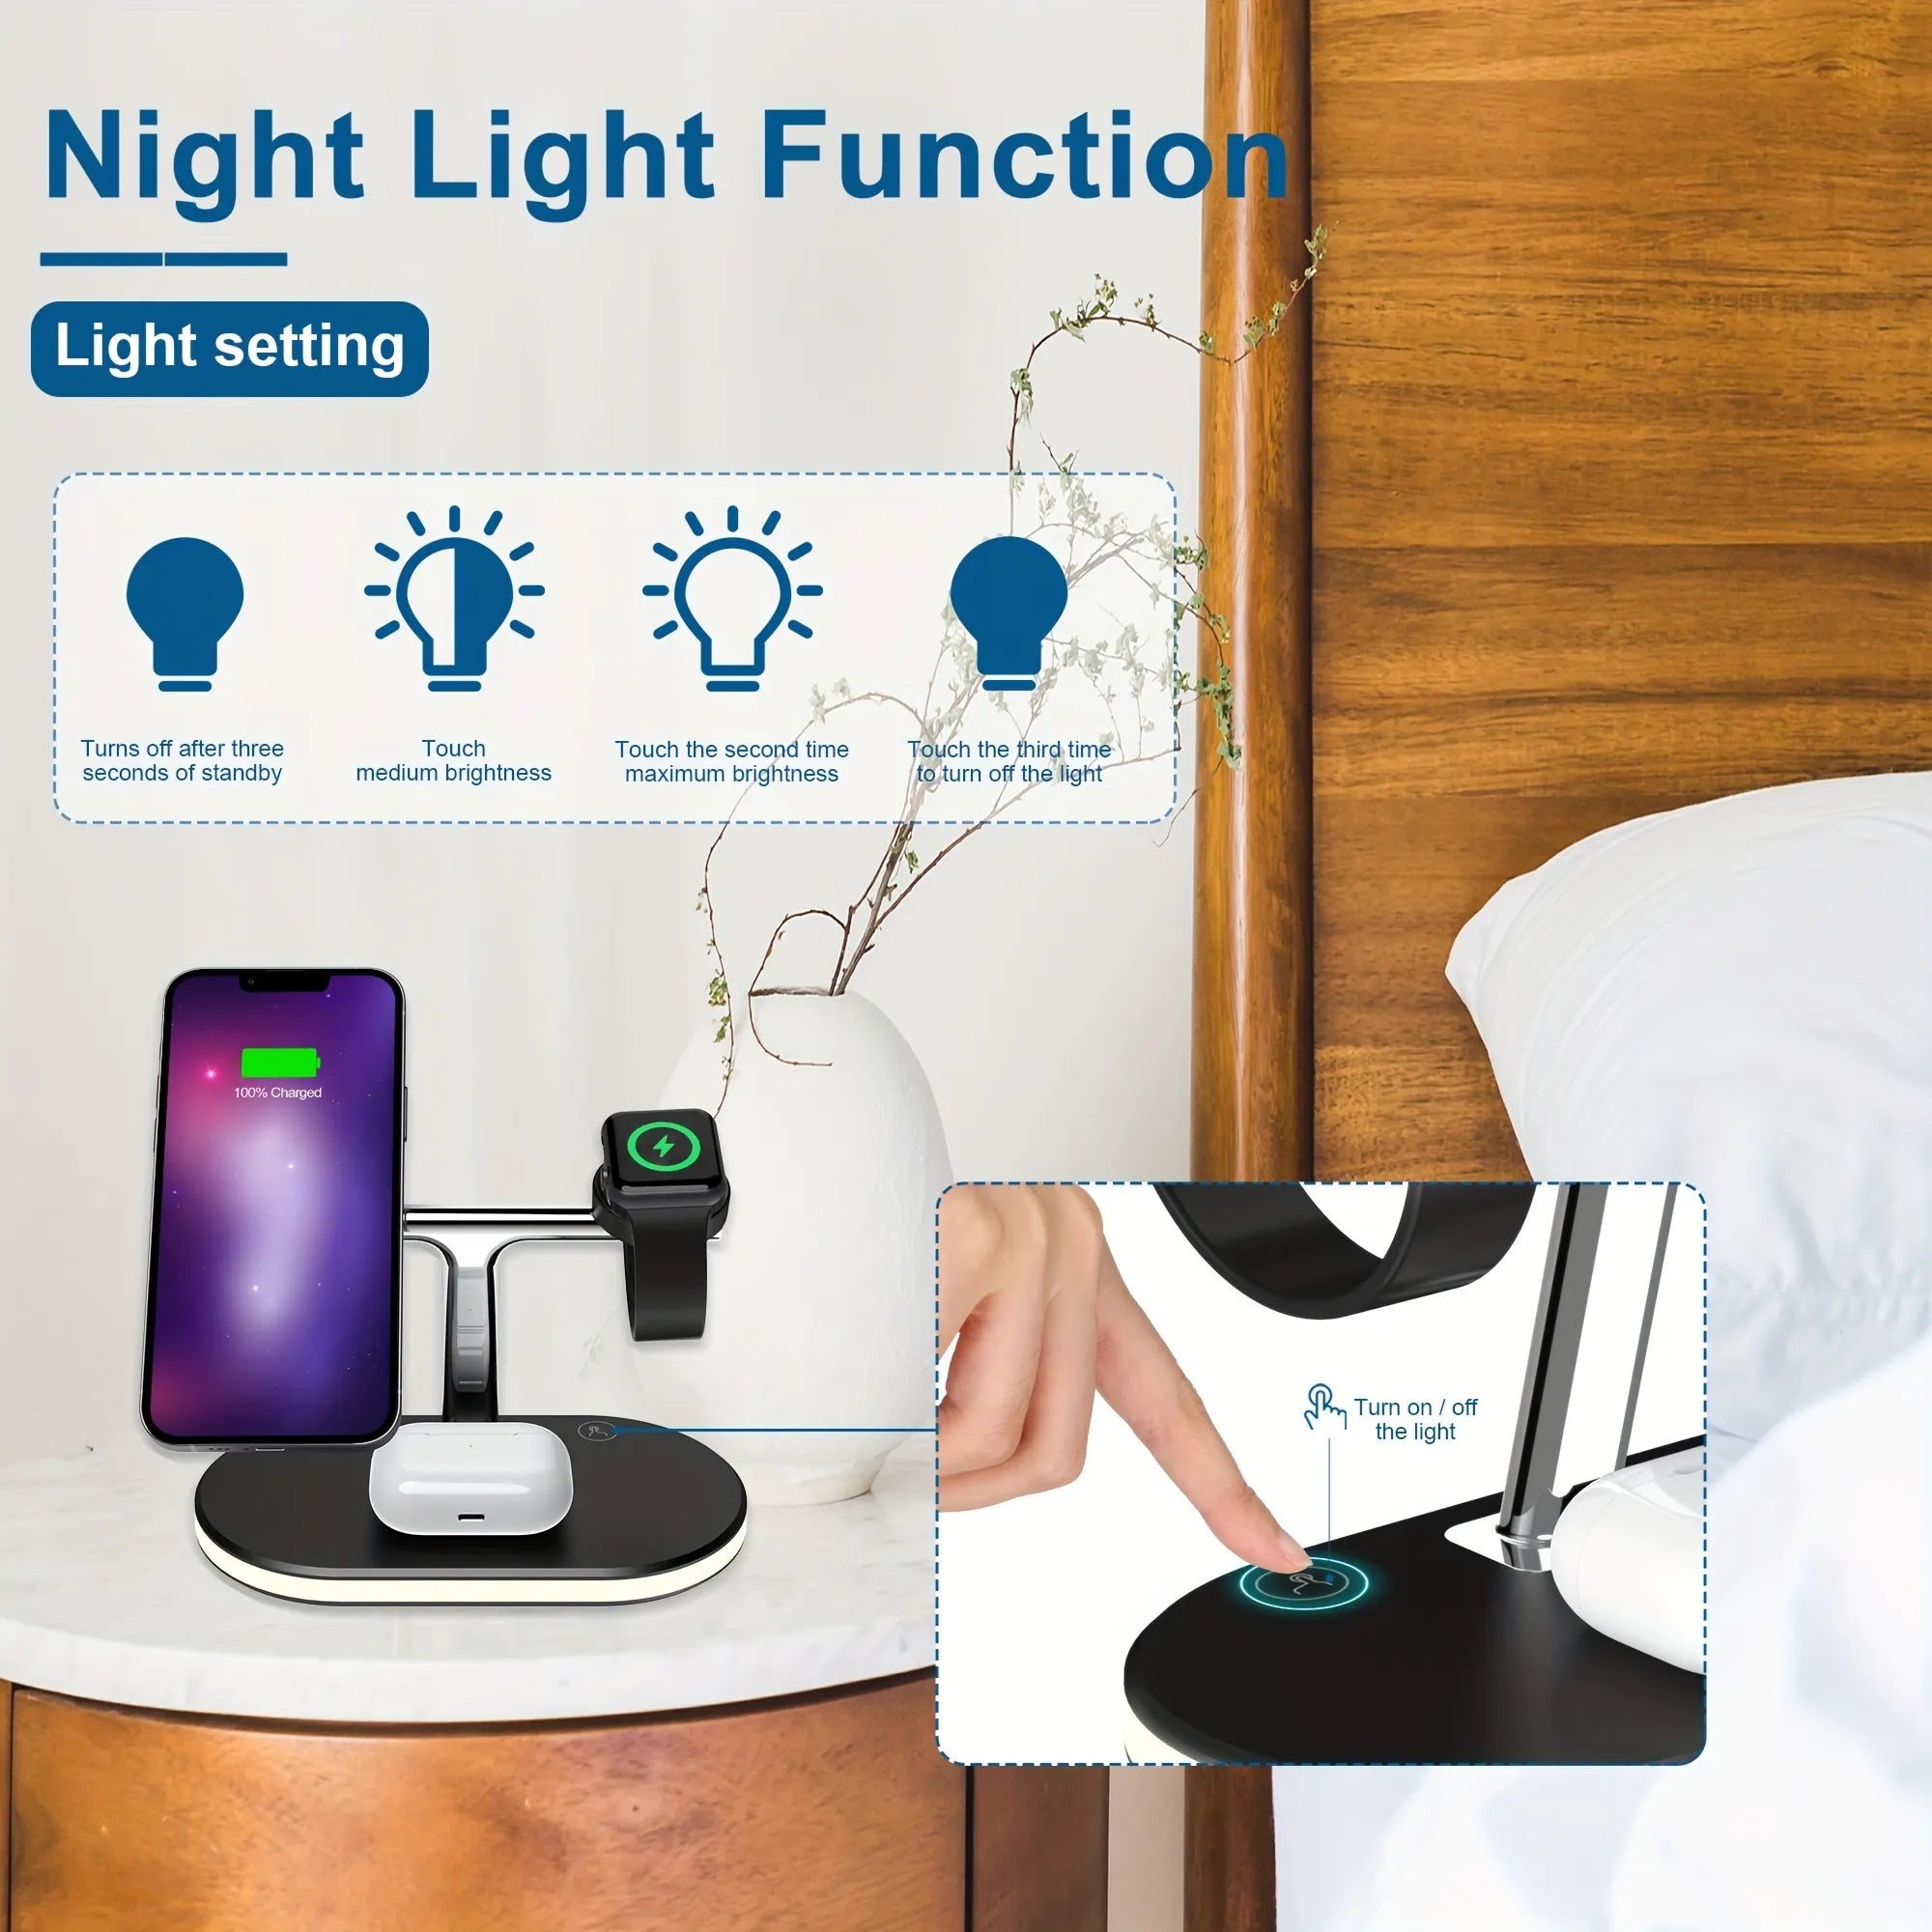 This 3-in-1 Magnetic Wireless Charging Station has a night light function, adjustable in three levels